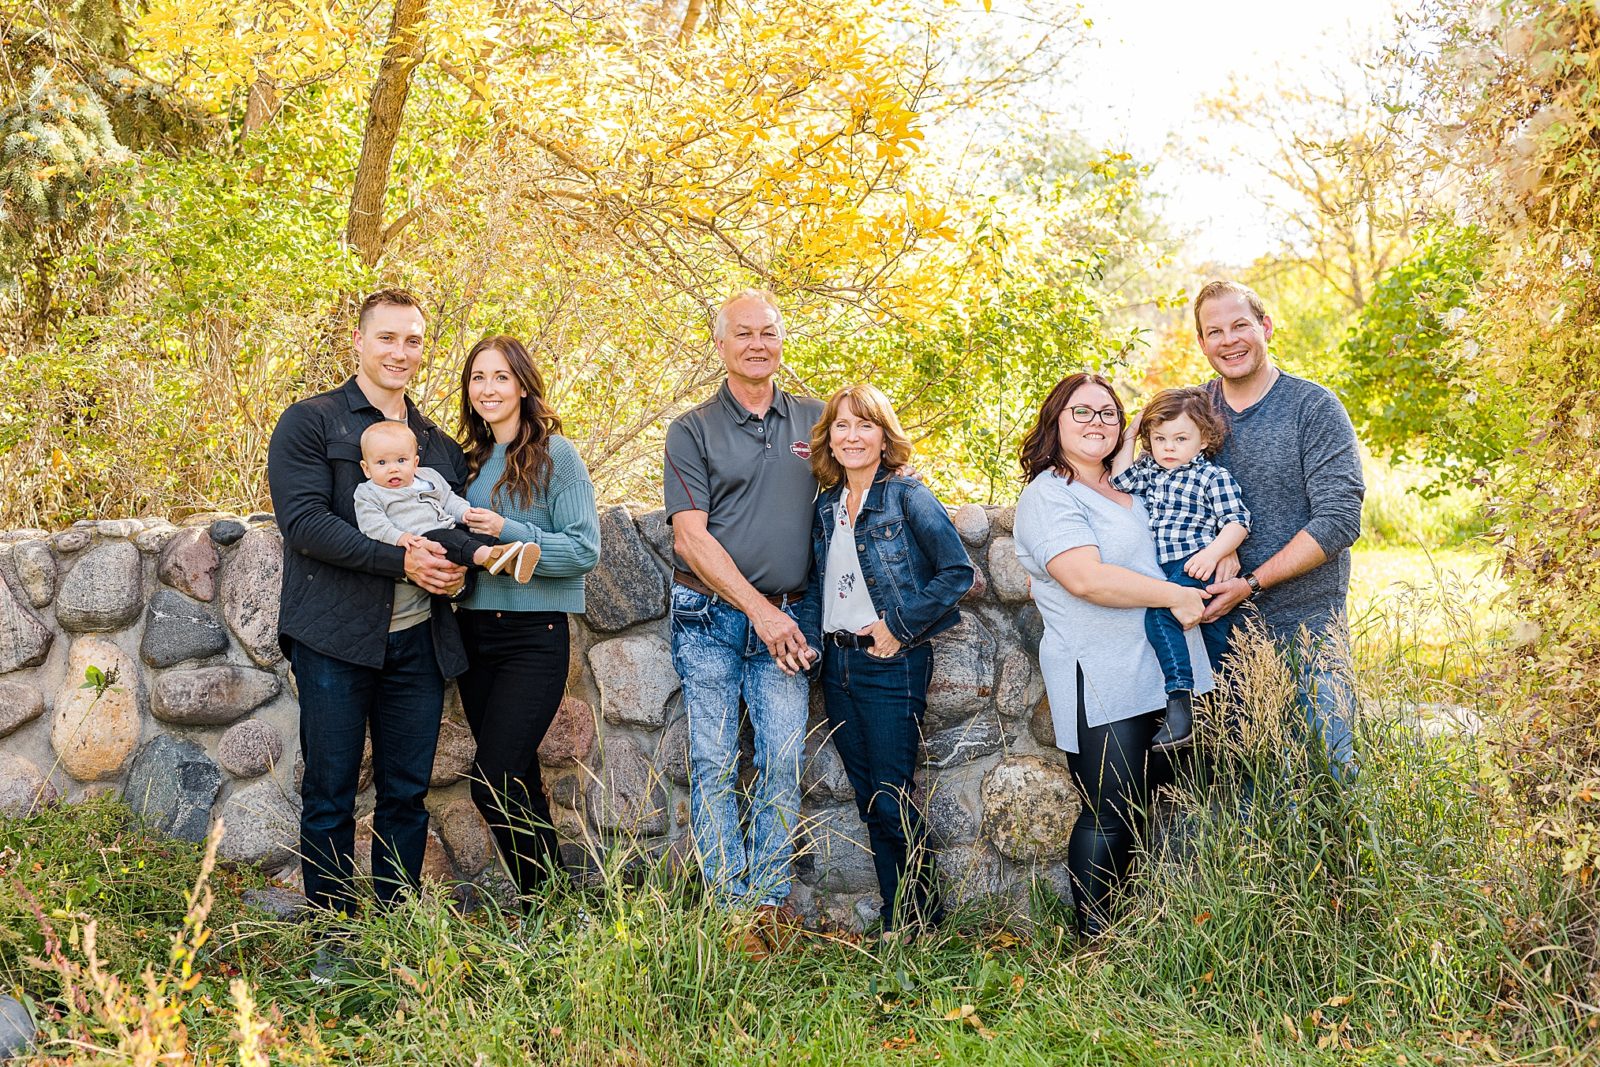 Extended family photos in the fall with young kids